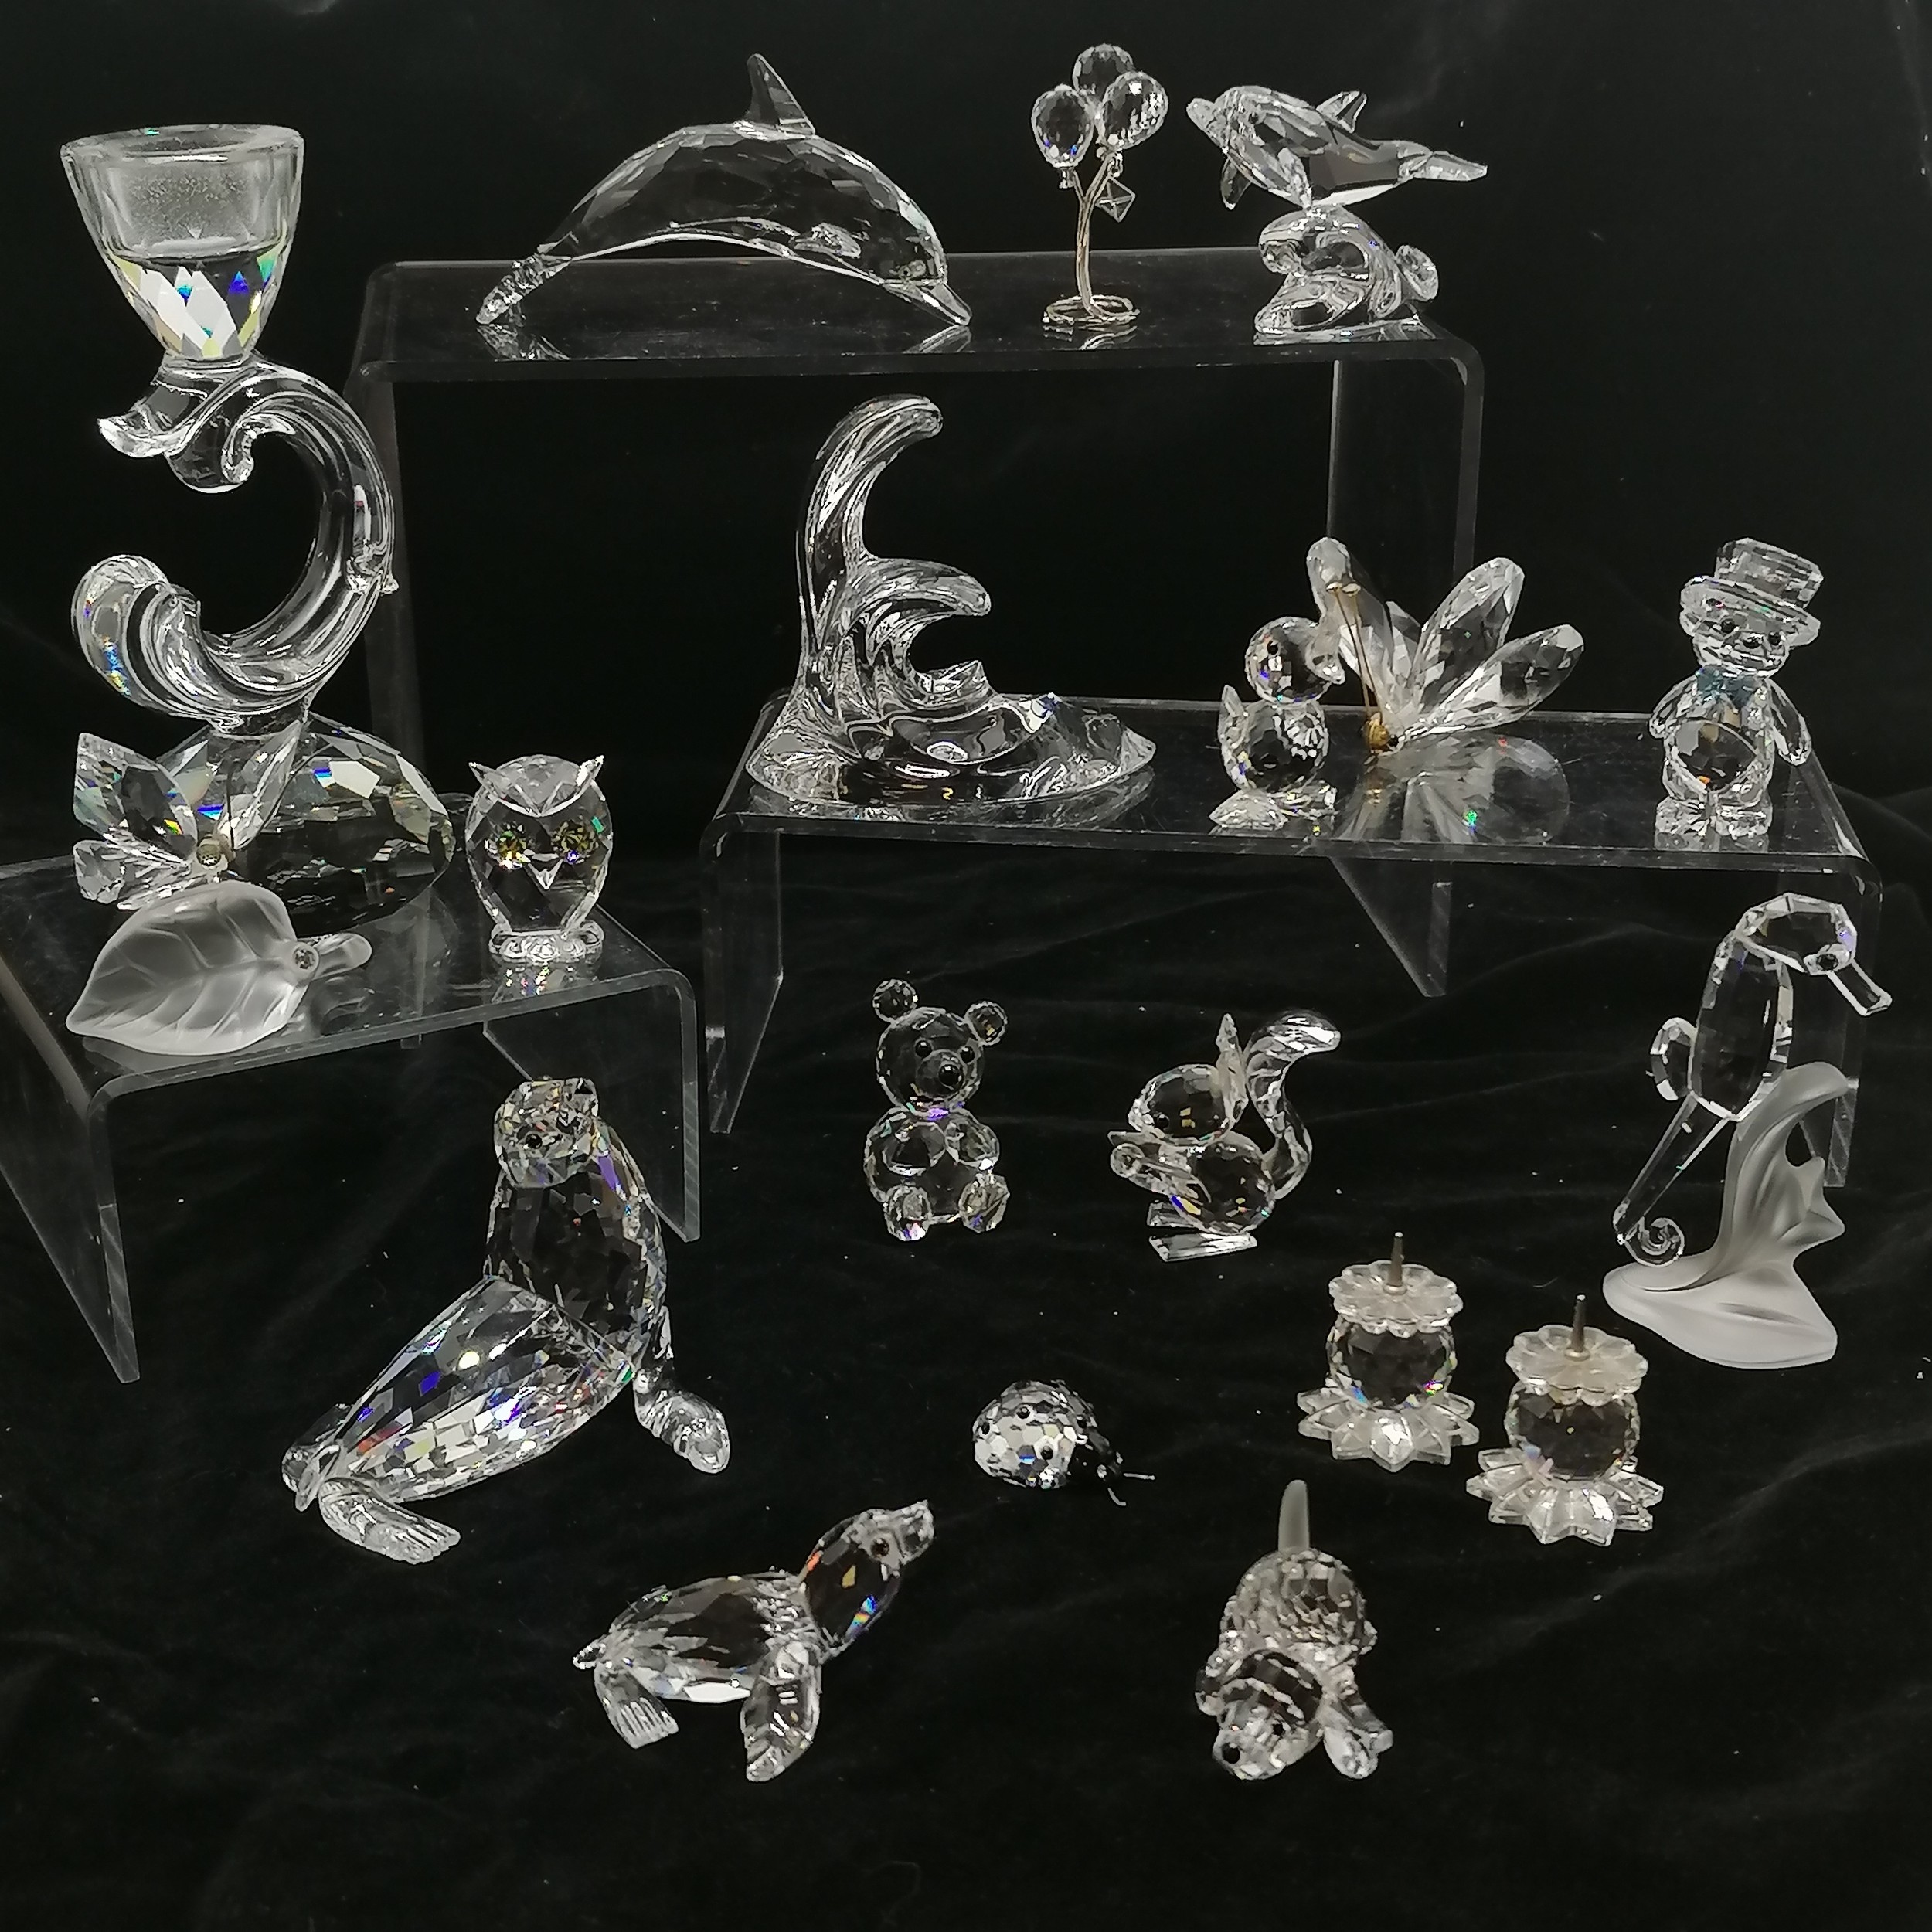 Swarovski glass candlestick 13 cm high, pair small candlesticks T/W 16 animals etc. only damage is